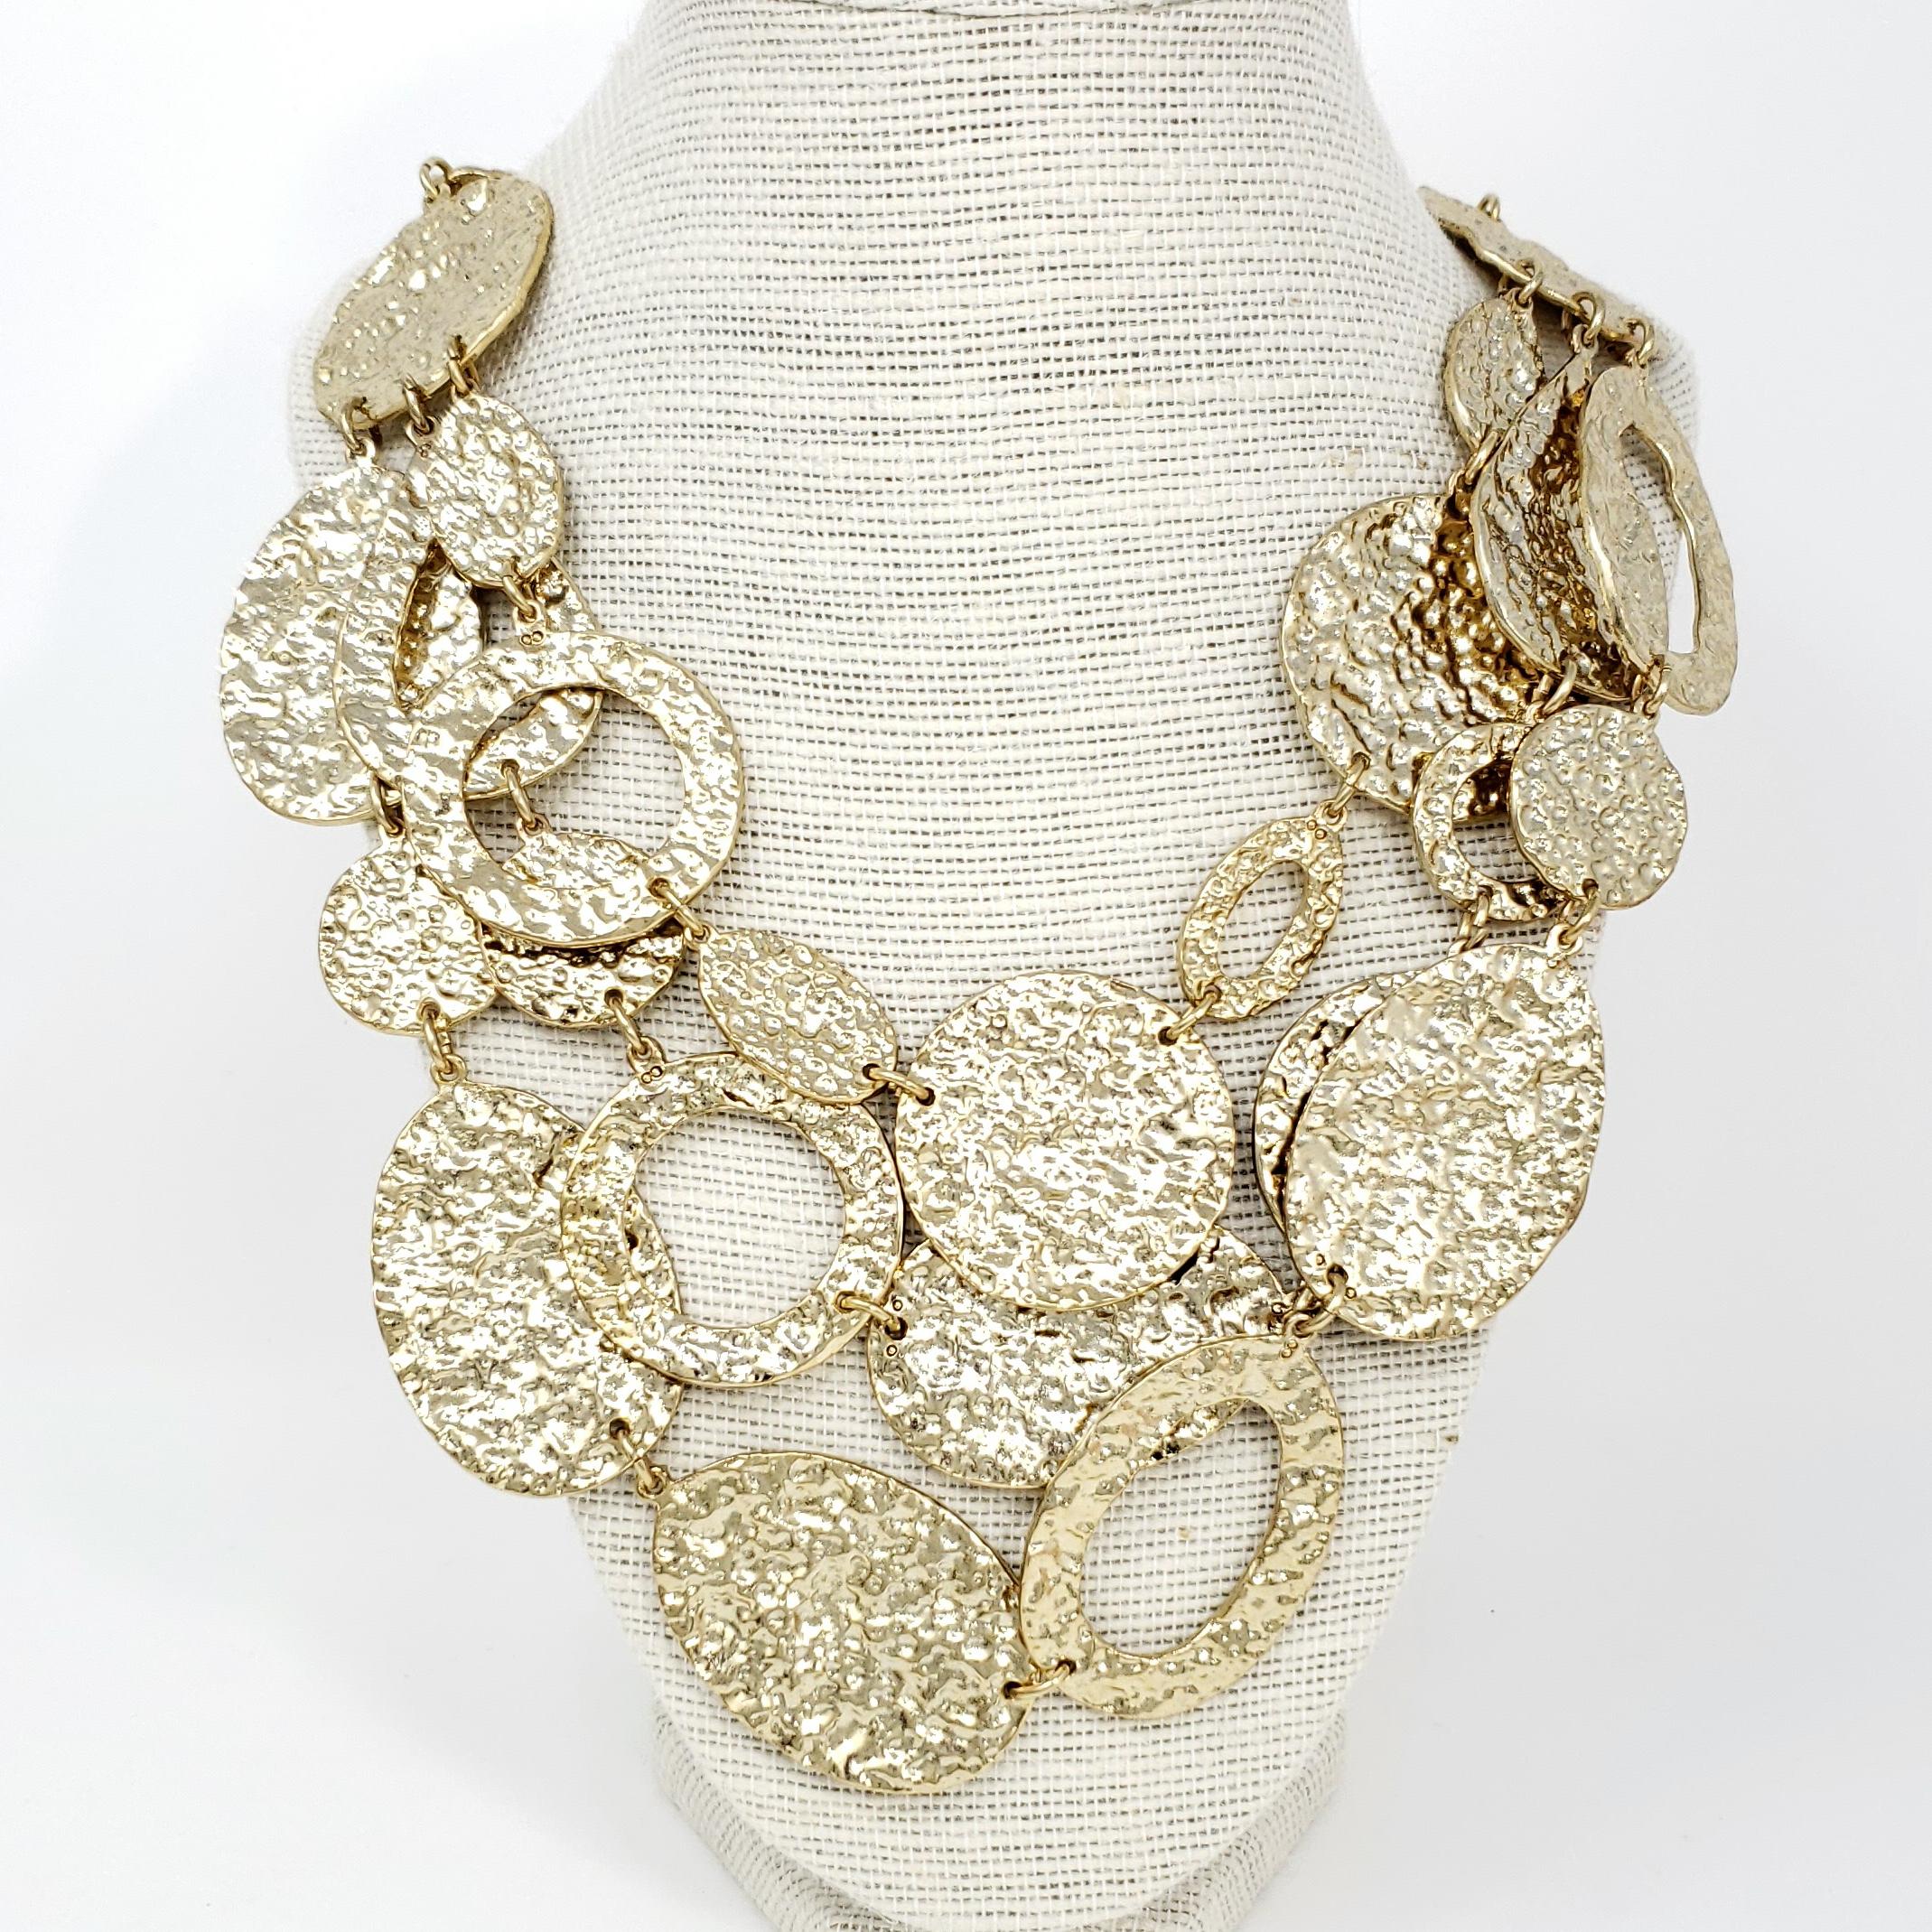 A bold statement necklace from Oscar de la Renta, sure to get compliments! 

Three strands of golden hammered discs and rings on a chain necklace.

Hallmarks: Oscar de la Renta

Length: 18 to 22 inches
